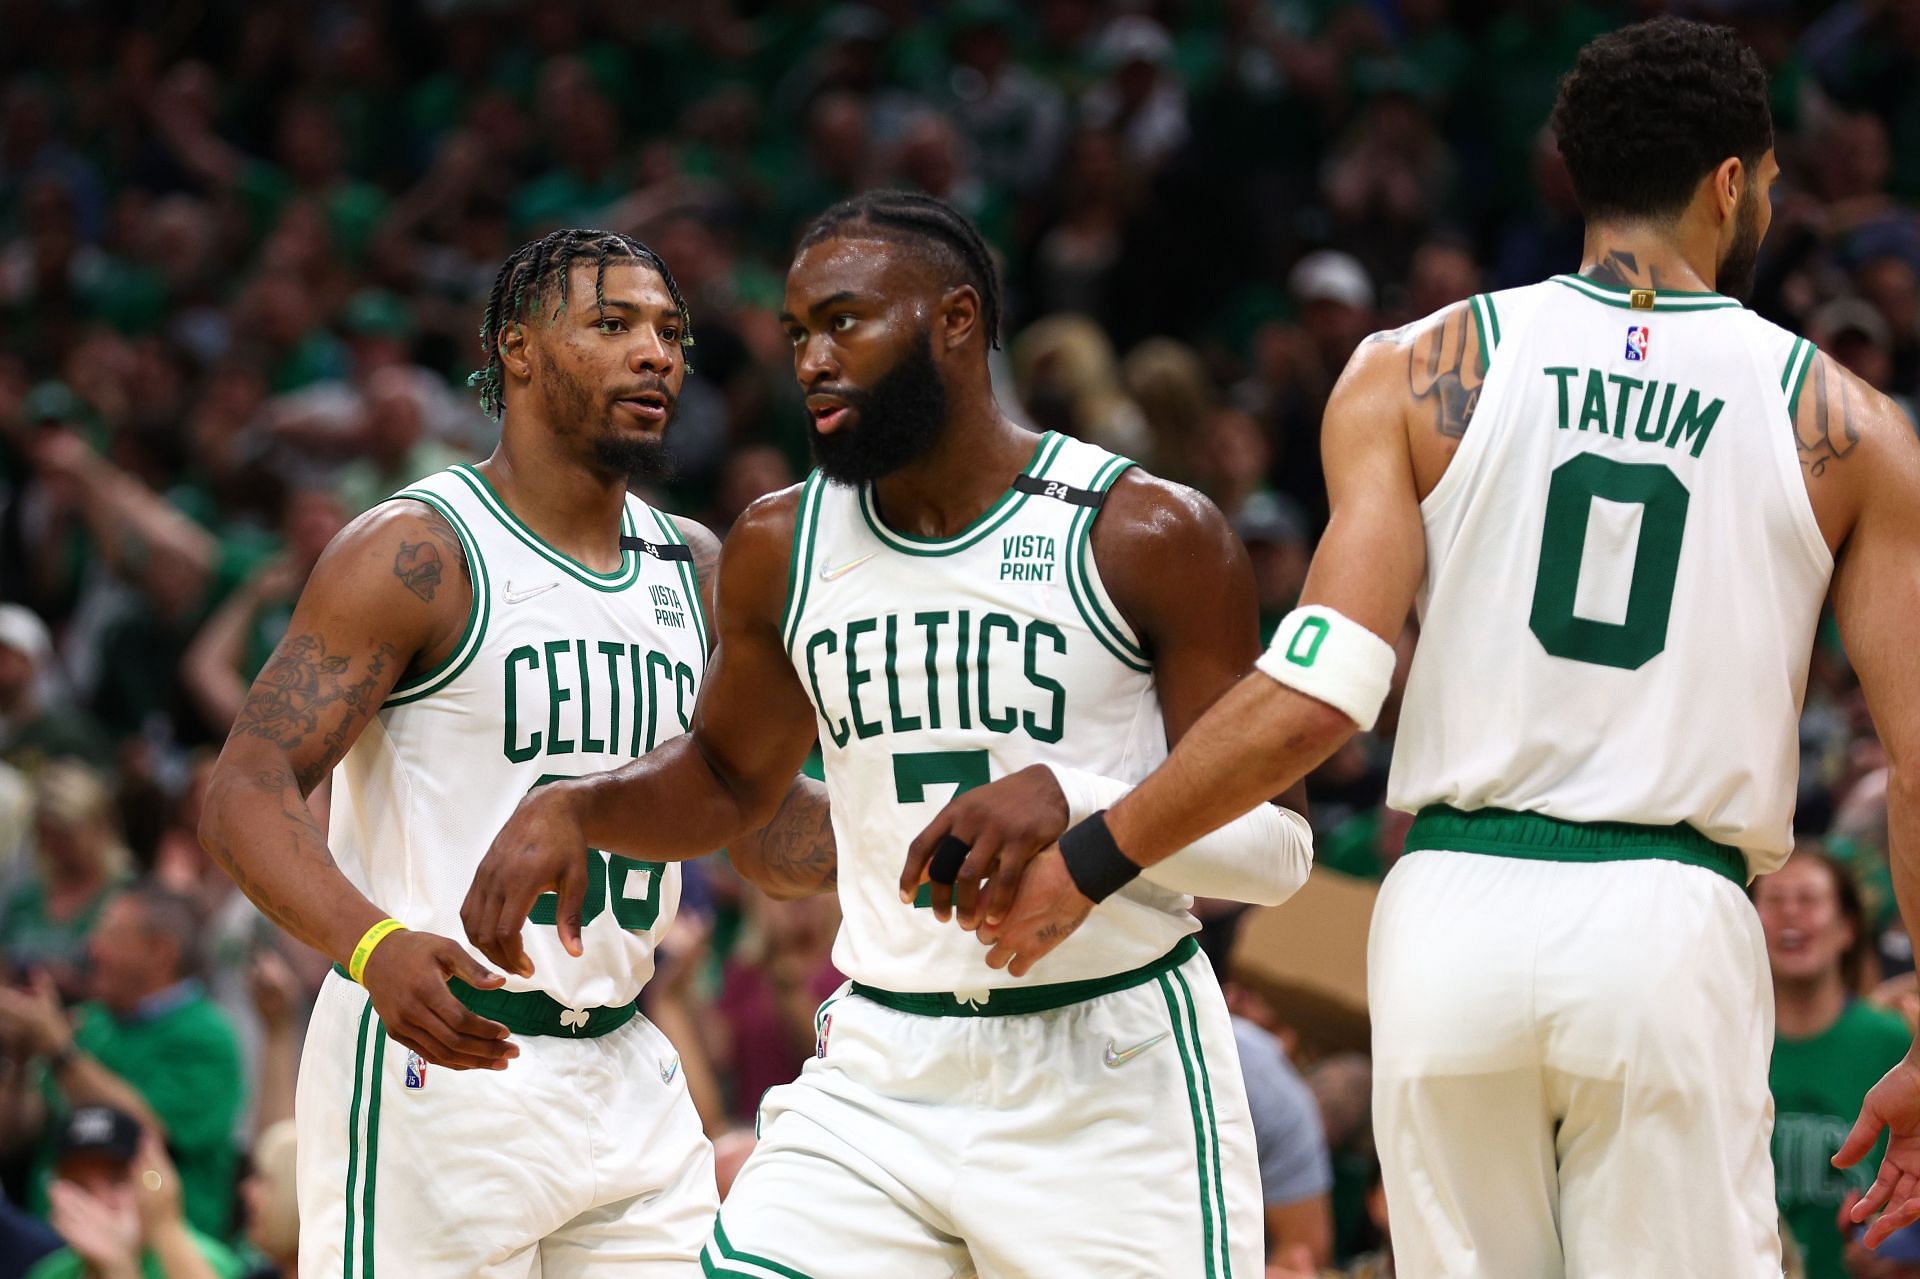 Shannon Sharpe believes the Boston Celtics should include Marcus Smart [far left] if that is what it takes to land Kevin Durant.